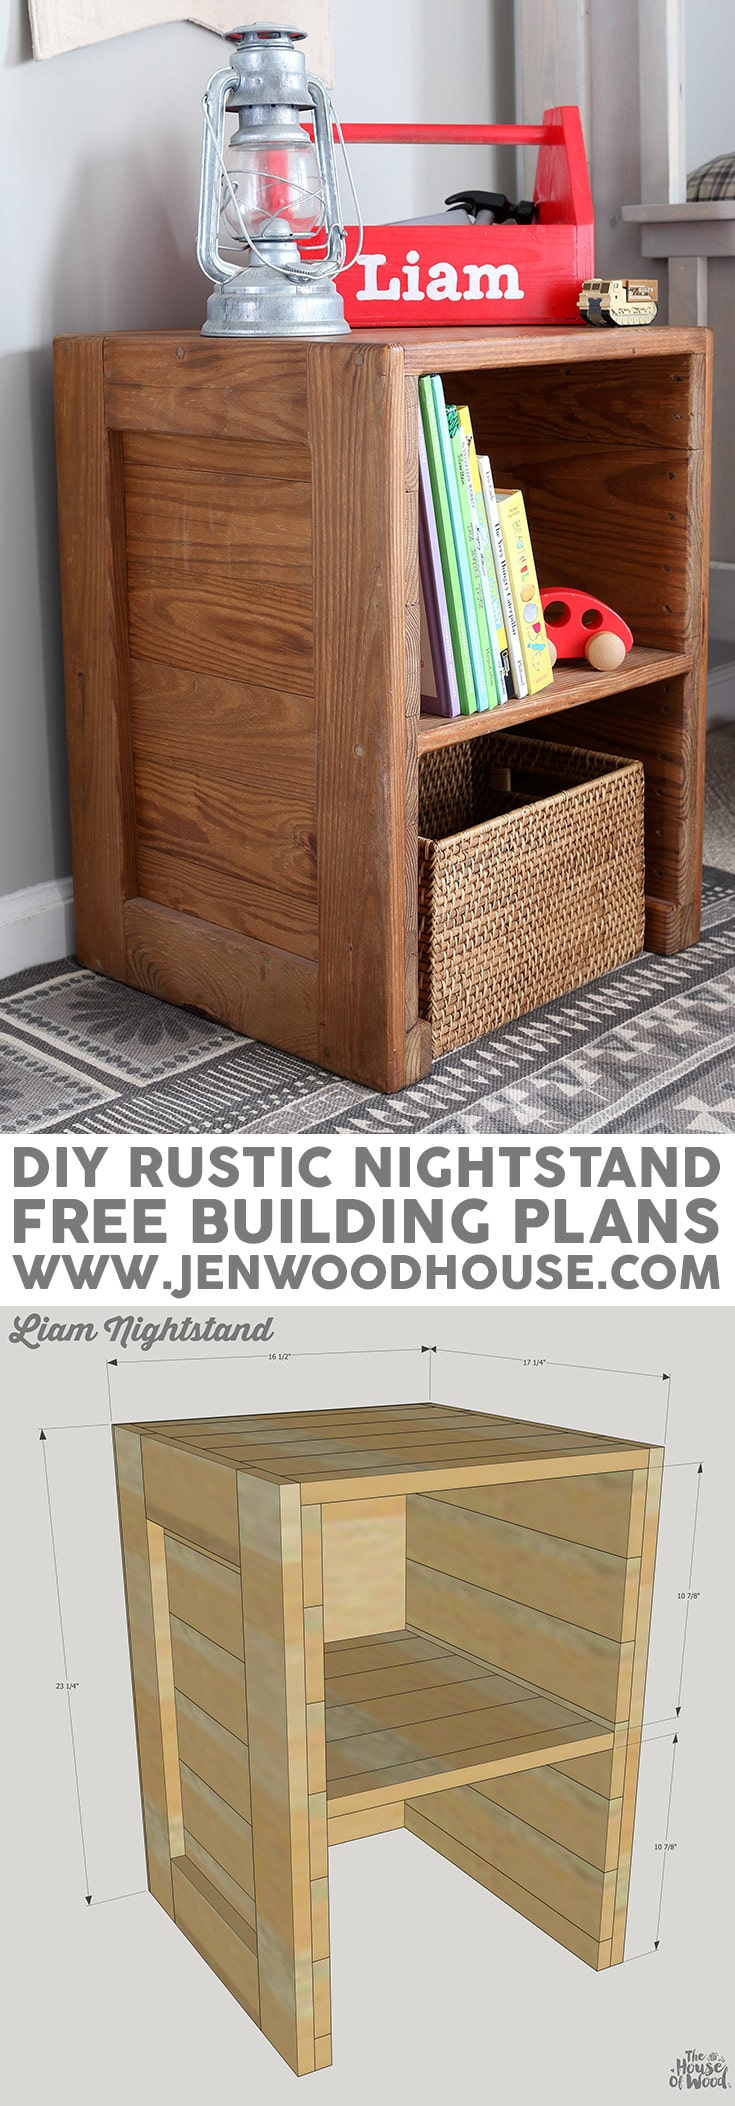 How to build a DIY rustic nightstand. Free building plans by Jen Woodhouse.